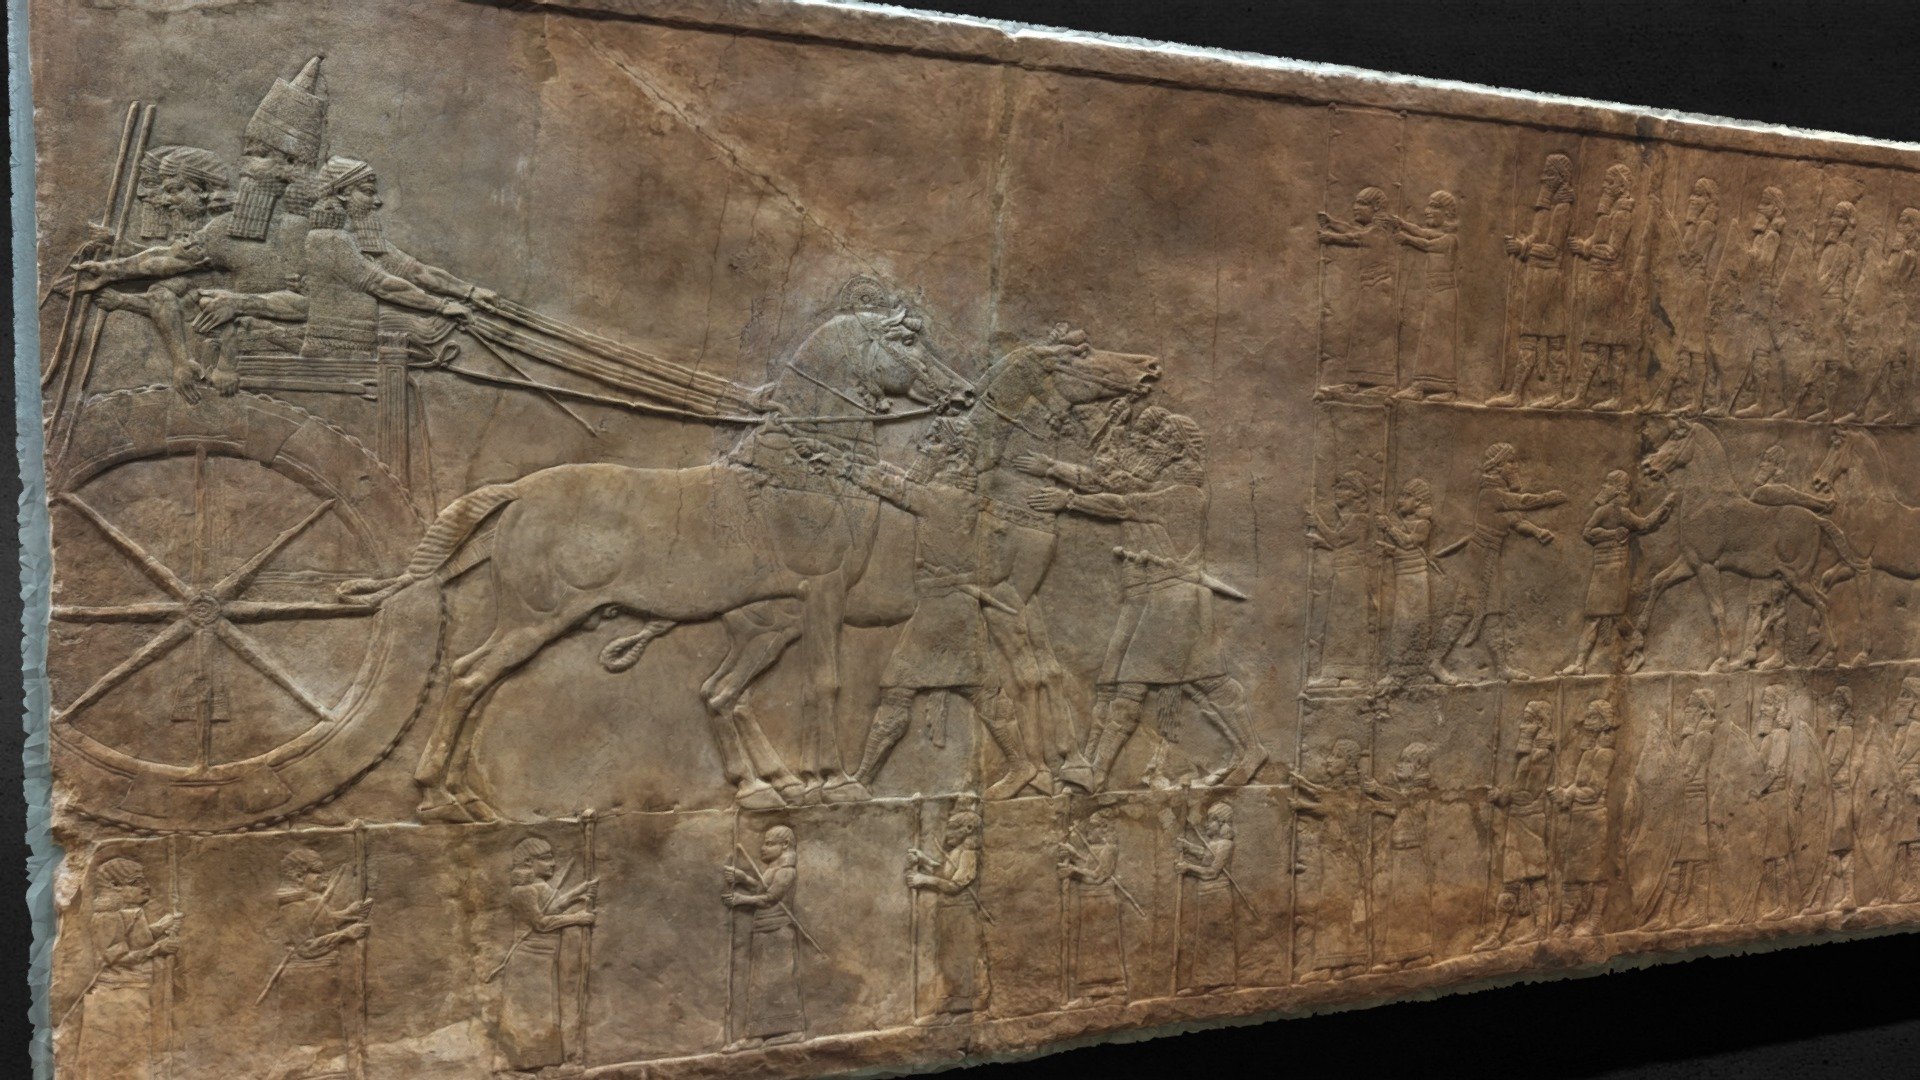 This is a famous artwork from ancient Assyria that can be found in the British Museum. In its web you can find this and more information: https://www.britishmuseum.org/collection/galleries/assyria-lion-hunts

In ancient Assyria, hunting lions was considered the sport of kings, symbolic of the ruling monarch's duty to protect and fight for his people. The sculpted reliefs in Room 10a illustrate the sporting exploits of the last great Assyrian king, Ashurbanipal (668–631 BC) and were created for his palace at Nineveh (in modern-day northern Iraq).
The hunt scenes, full of tension and realism, rank among the finest achievements of Assyrian Art. They depict the release of the lions, the ensuing chase and subsequent killing.

The model was obtained with photogrammetry from photographs taken with an iphone 4s and is optimized for on-line visualization 3d model